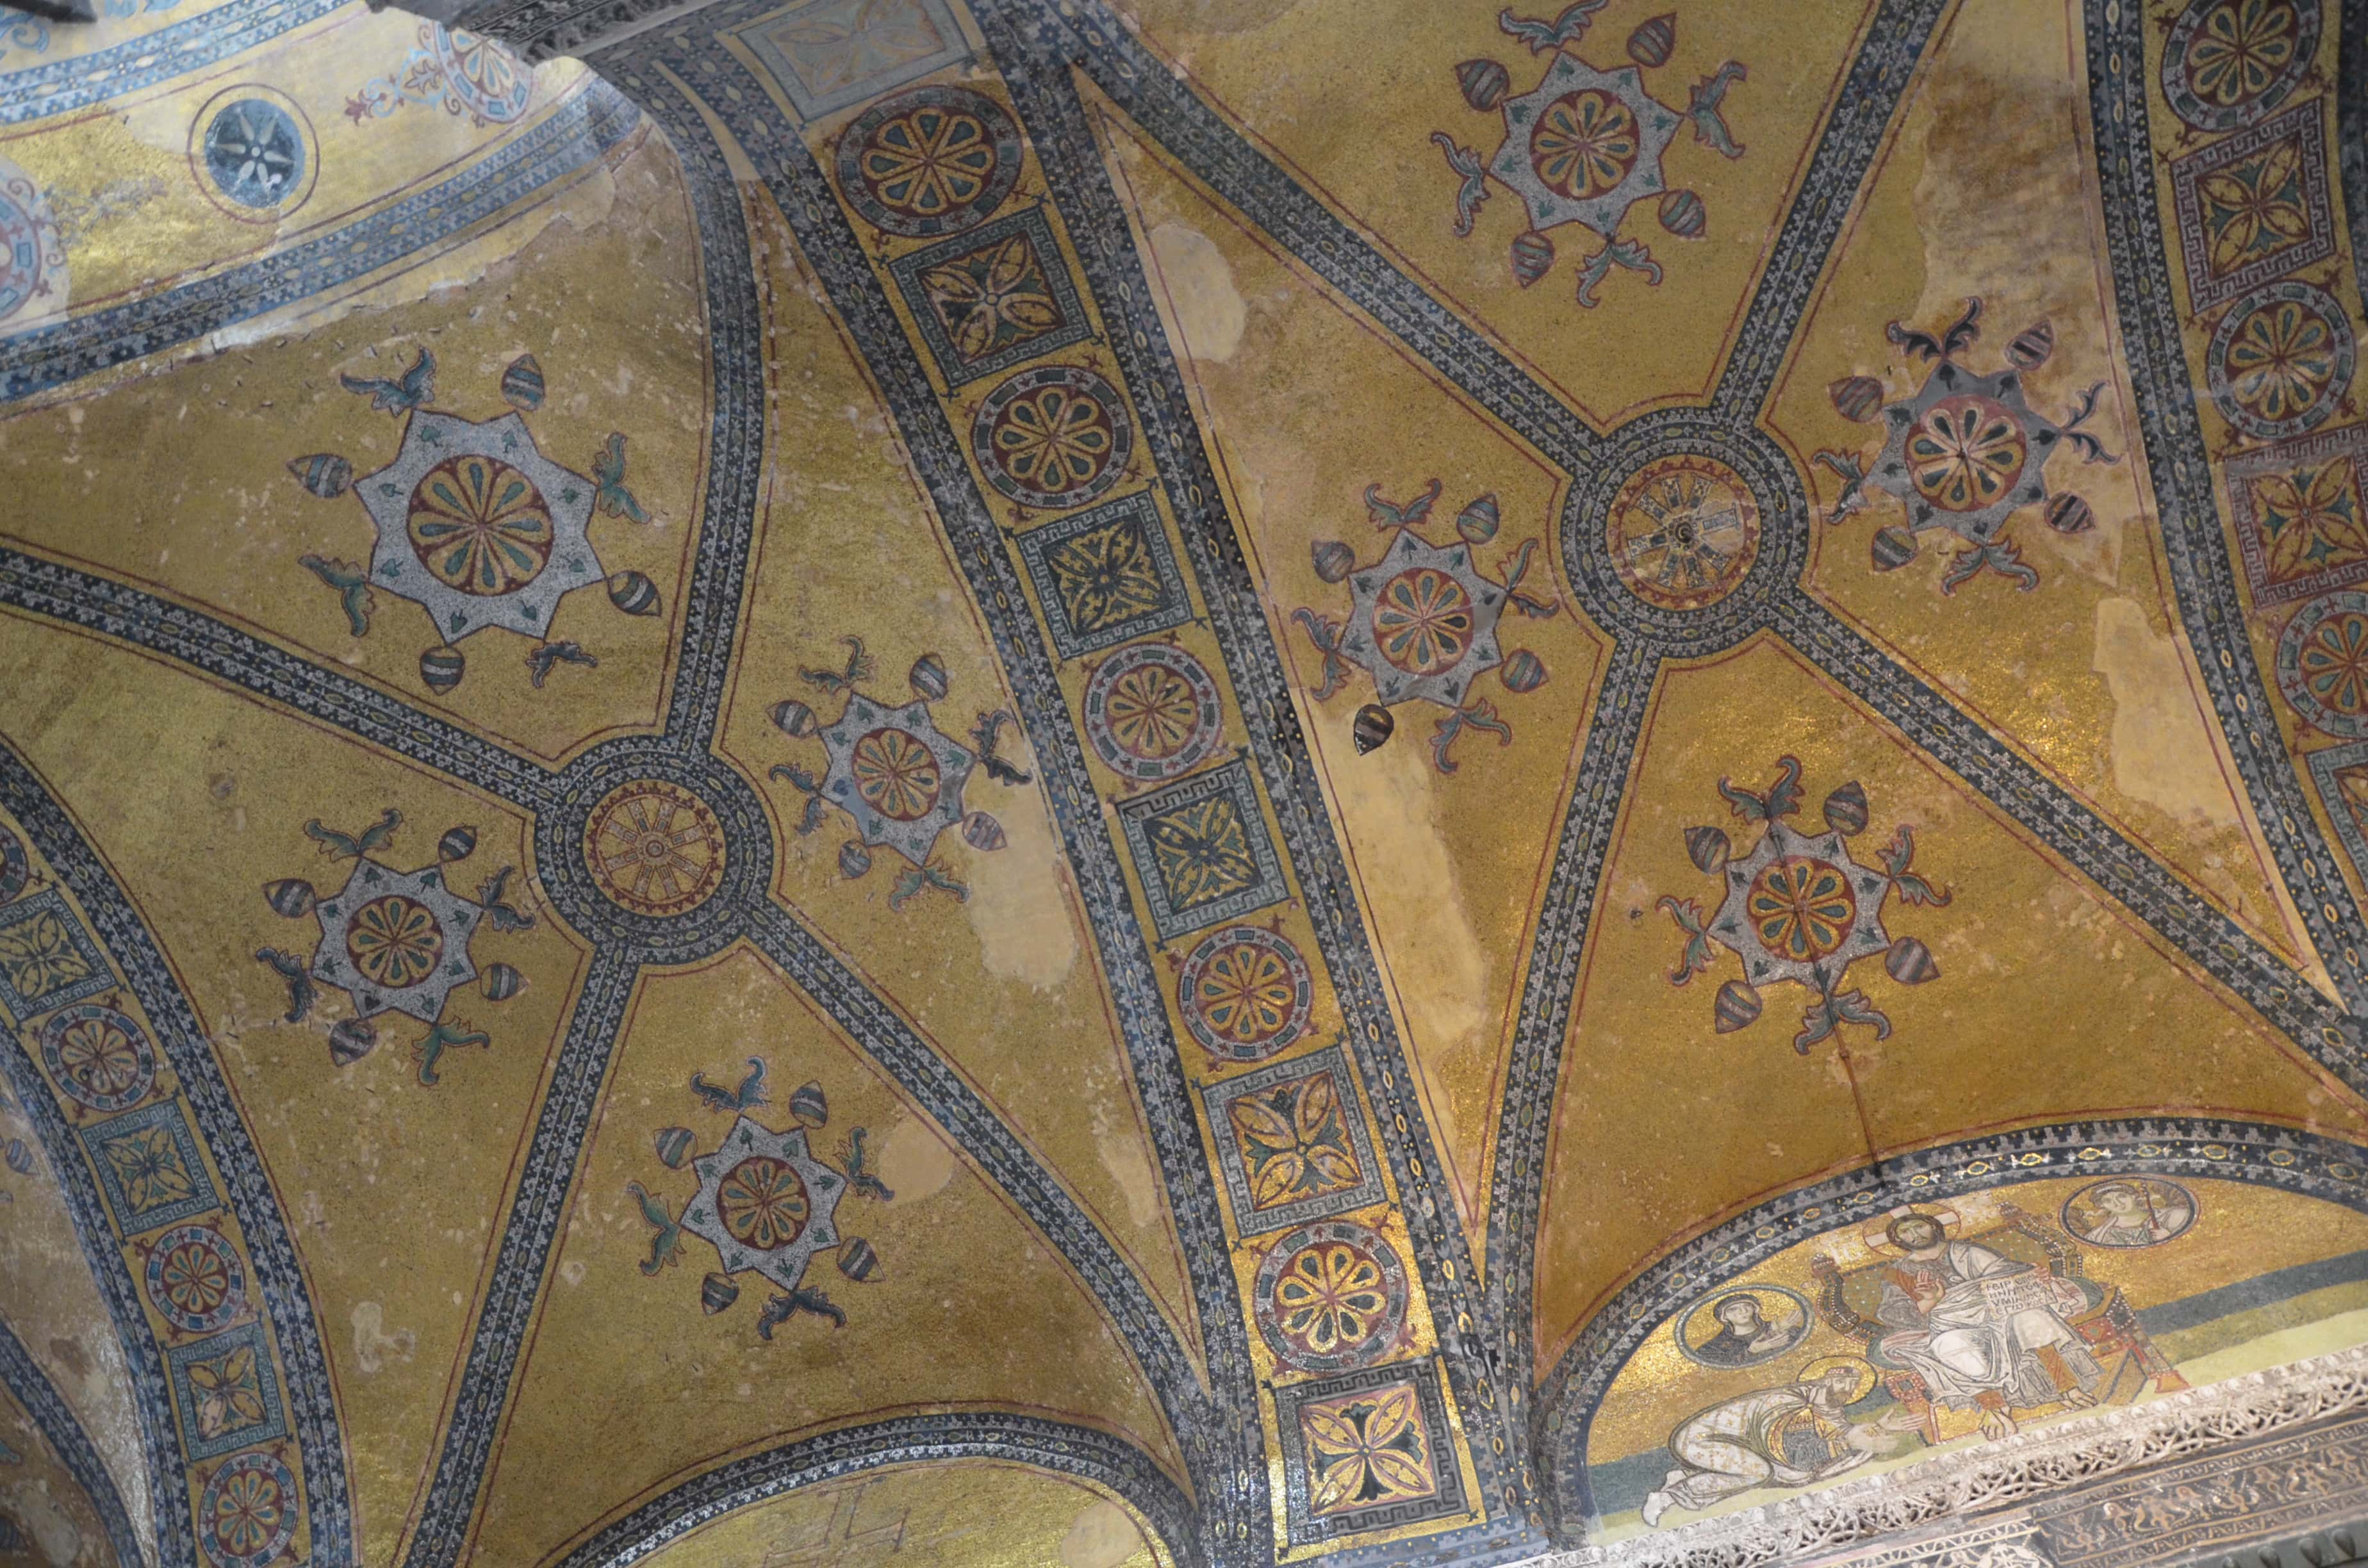 Vaulted ceiling of the inner narthex